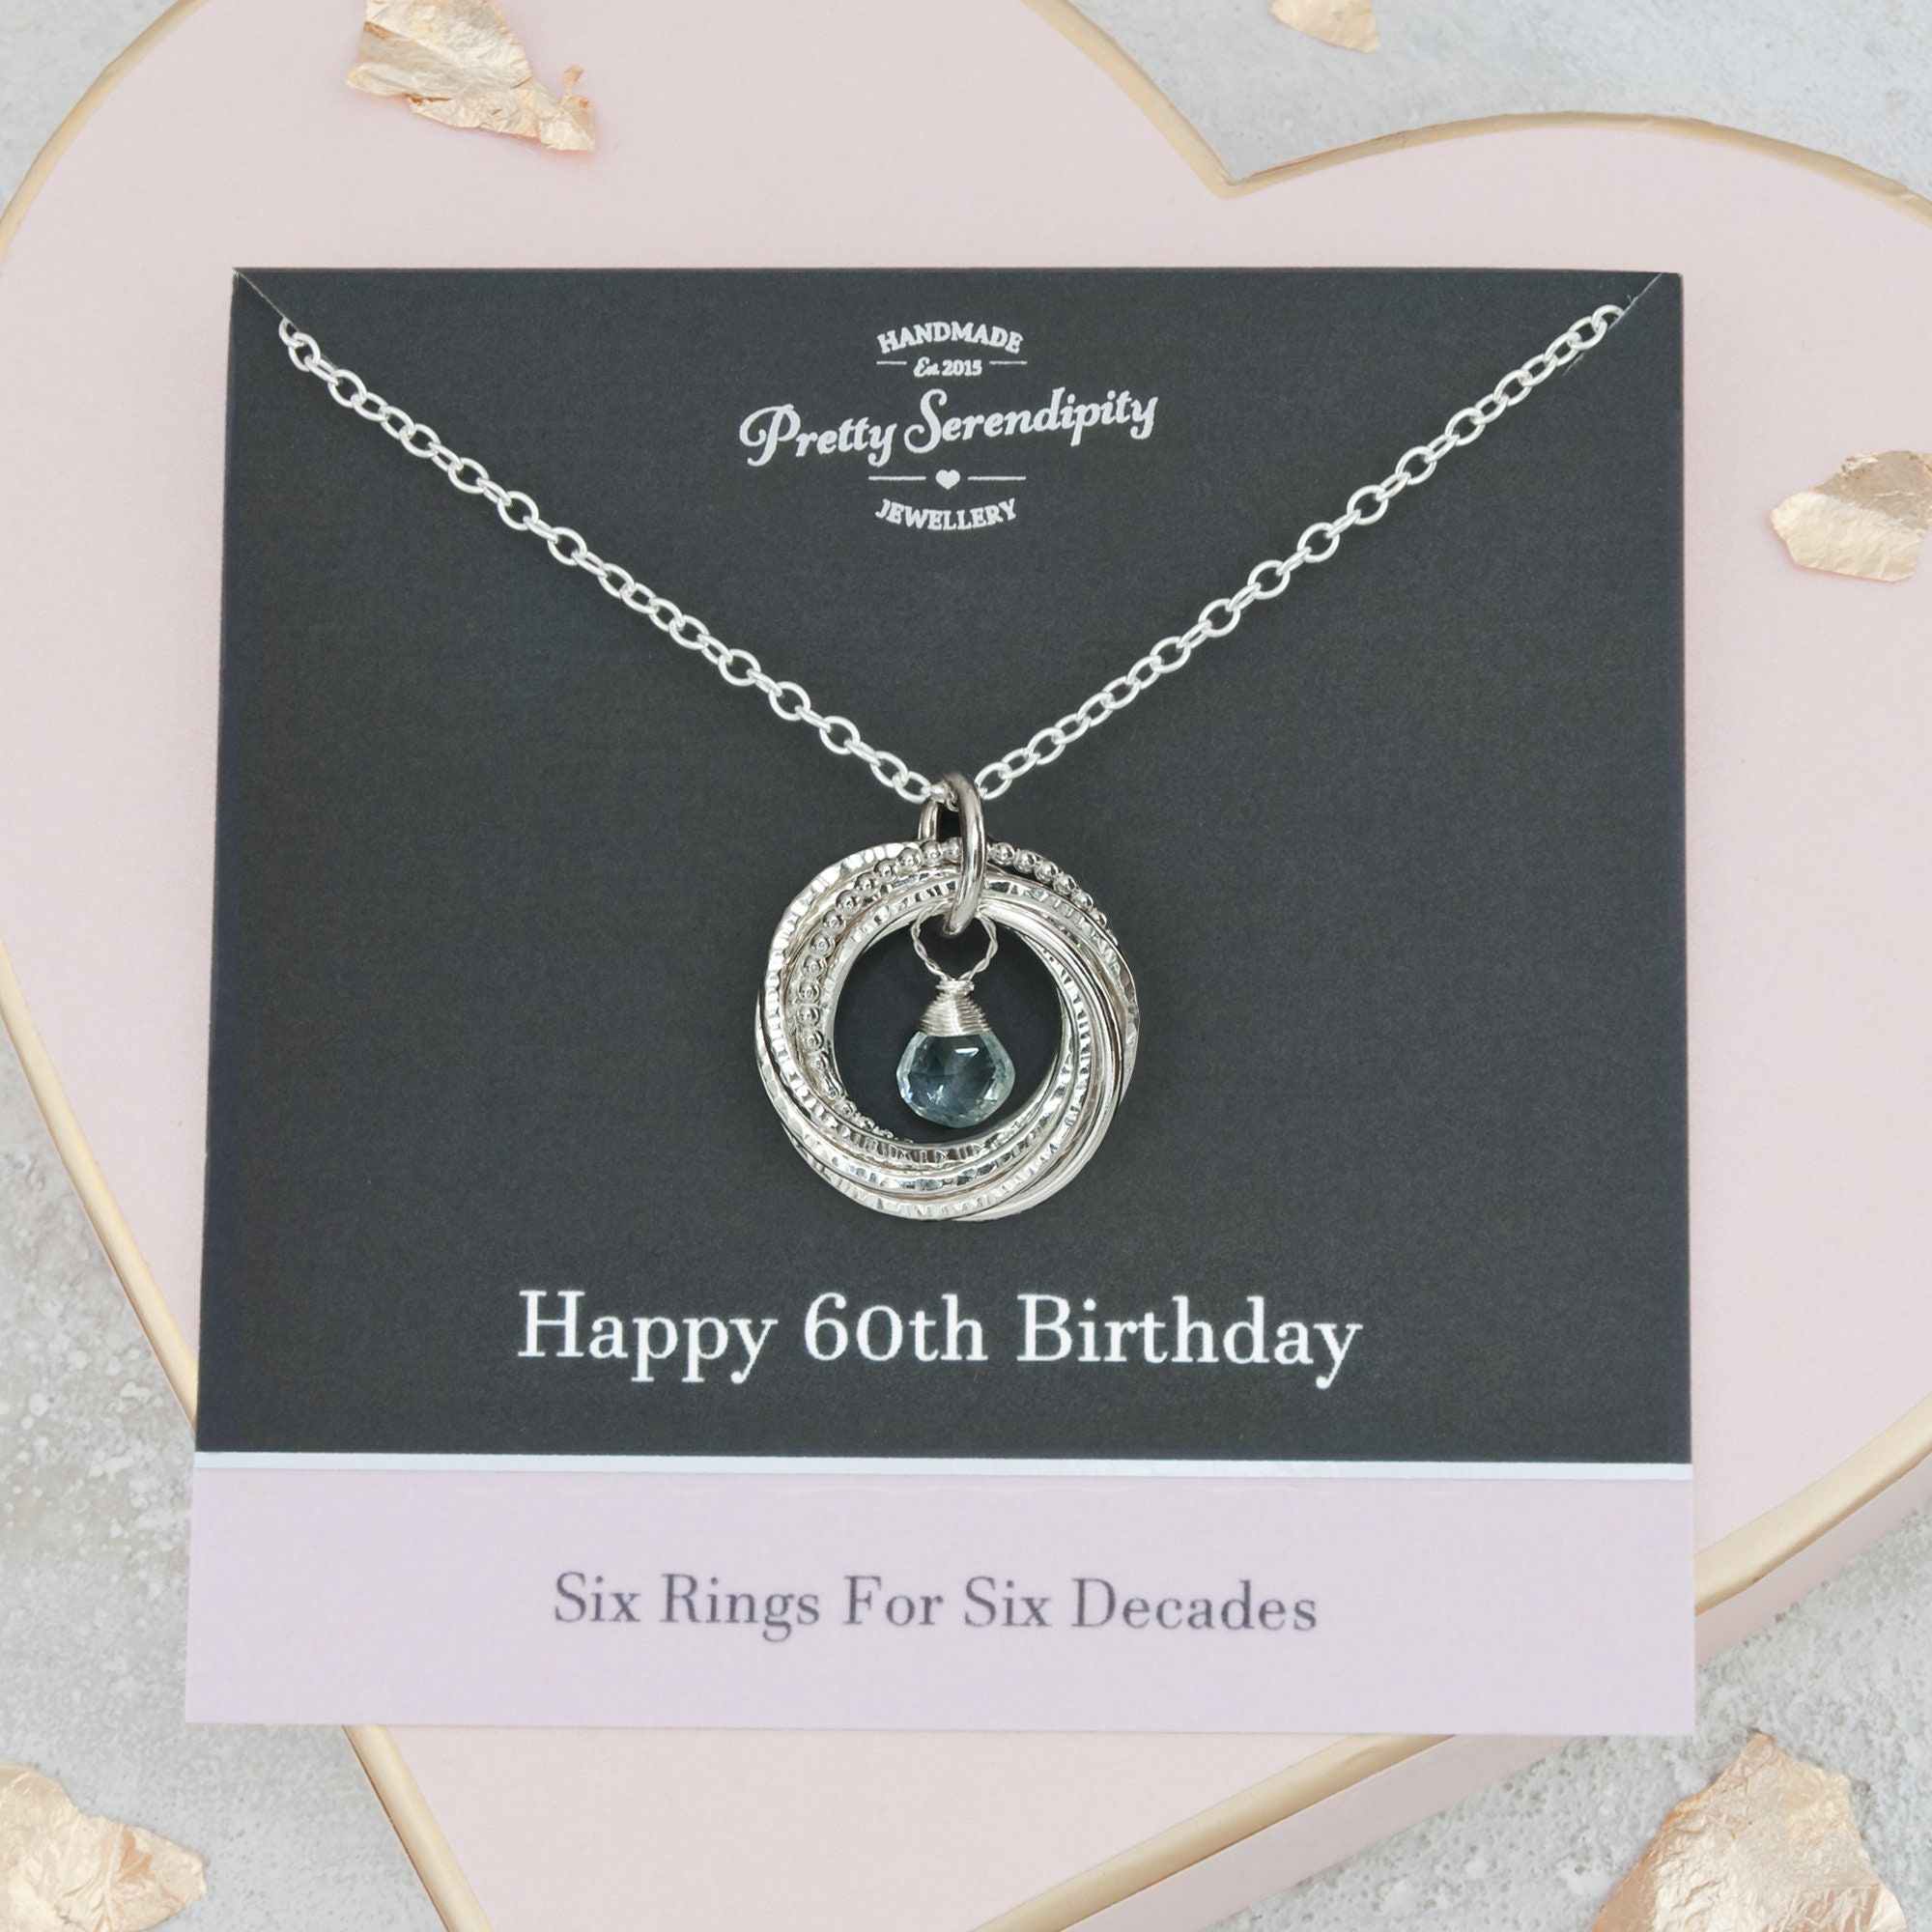 60Th Birthday Birthstone Necklace - Textured Sterling Silver, 6 Rings For Decades, Gift Her